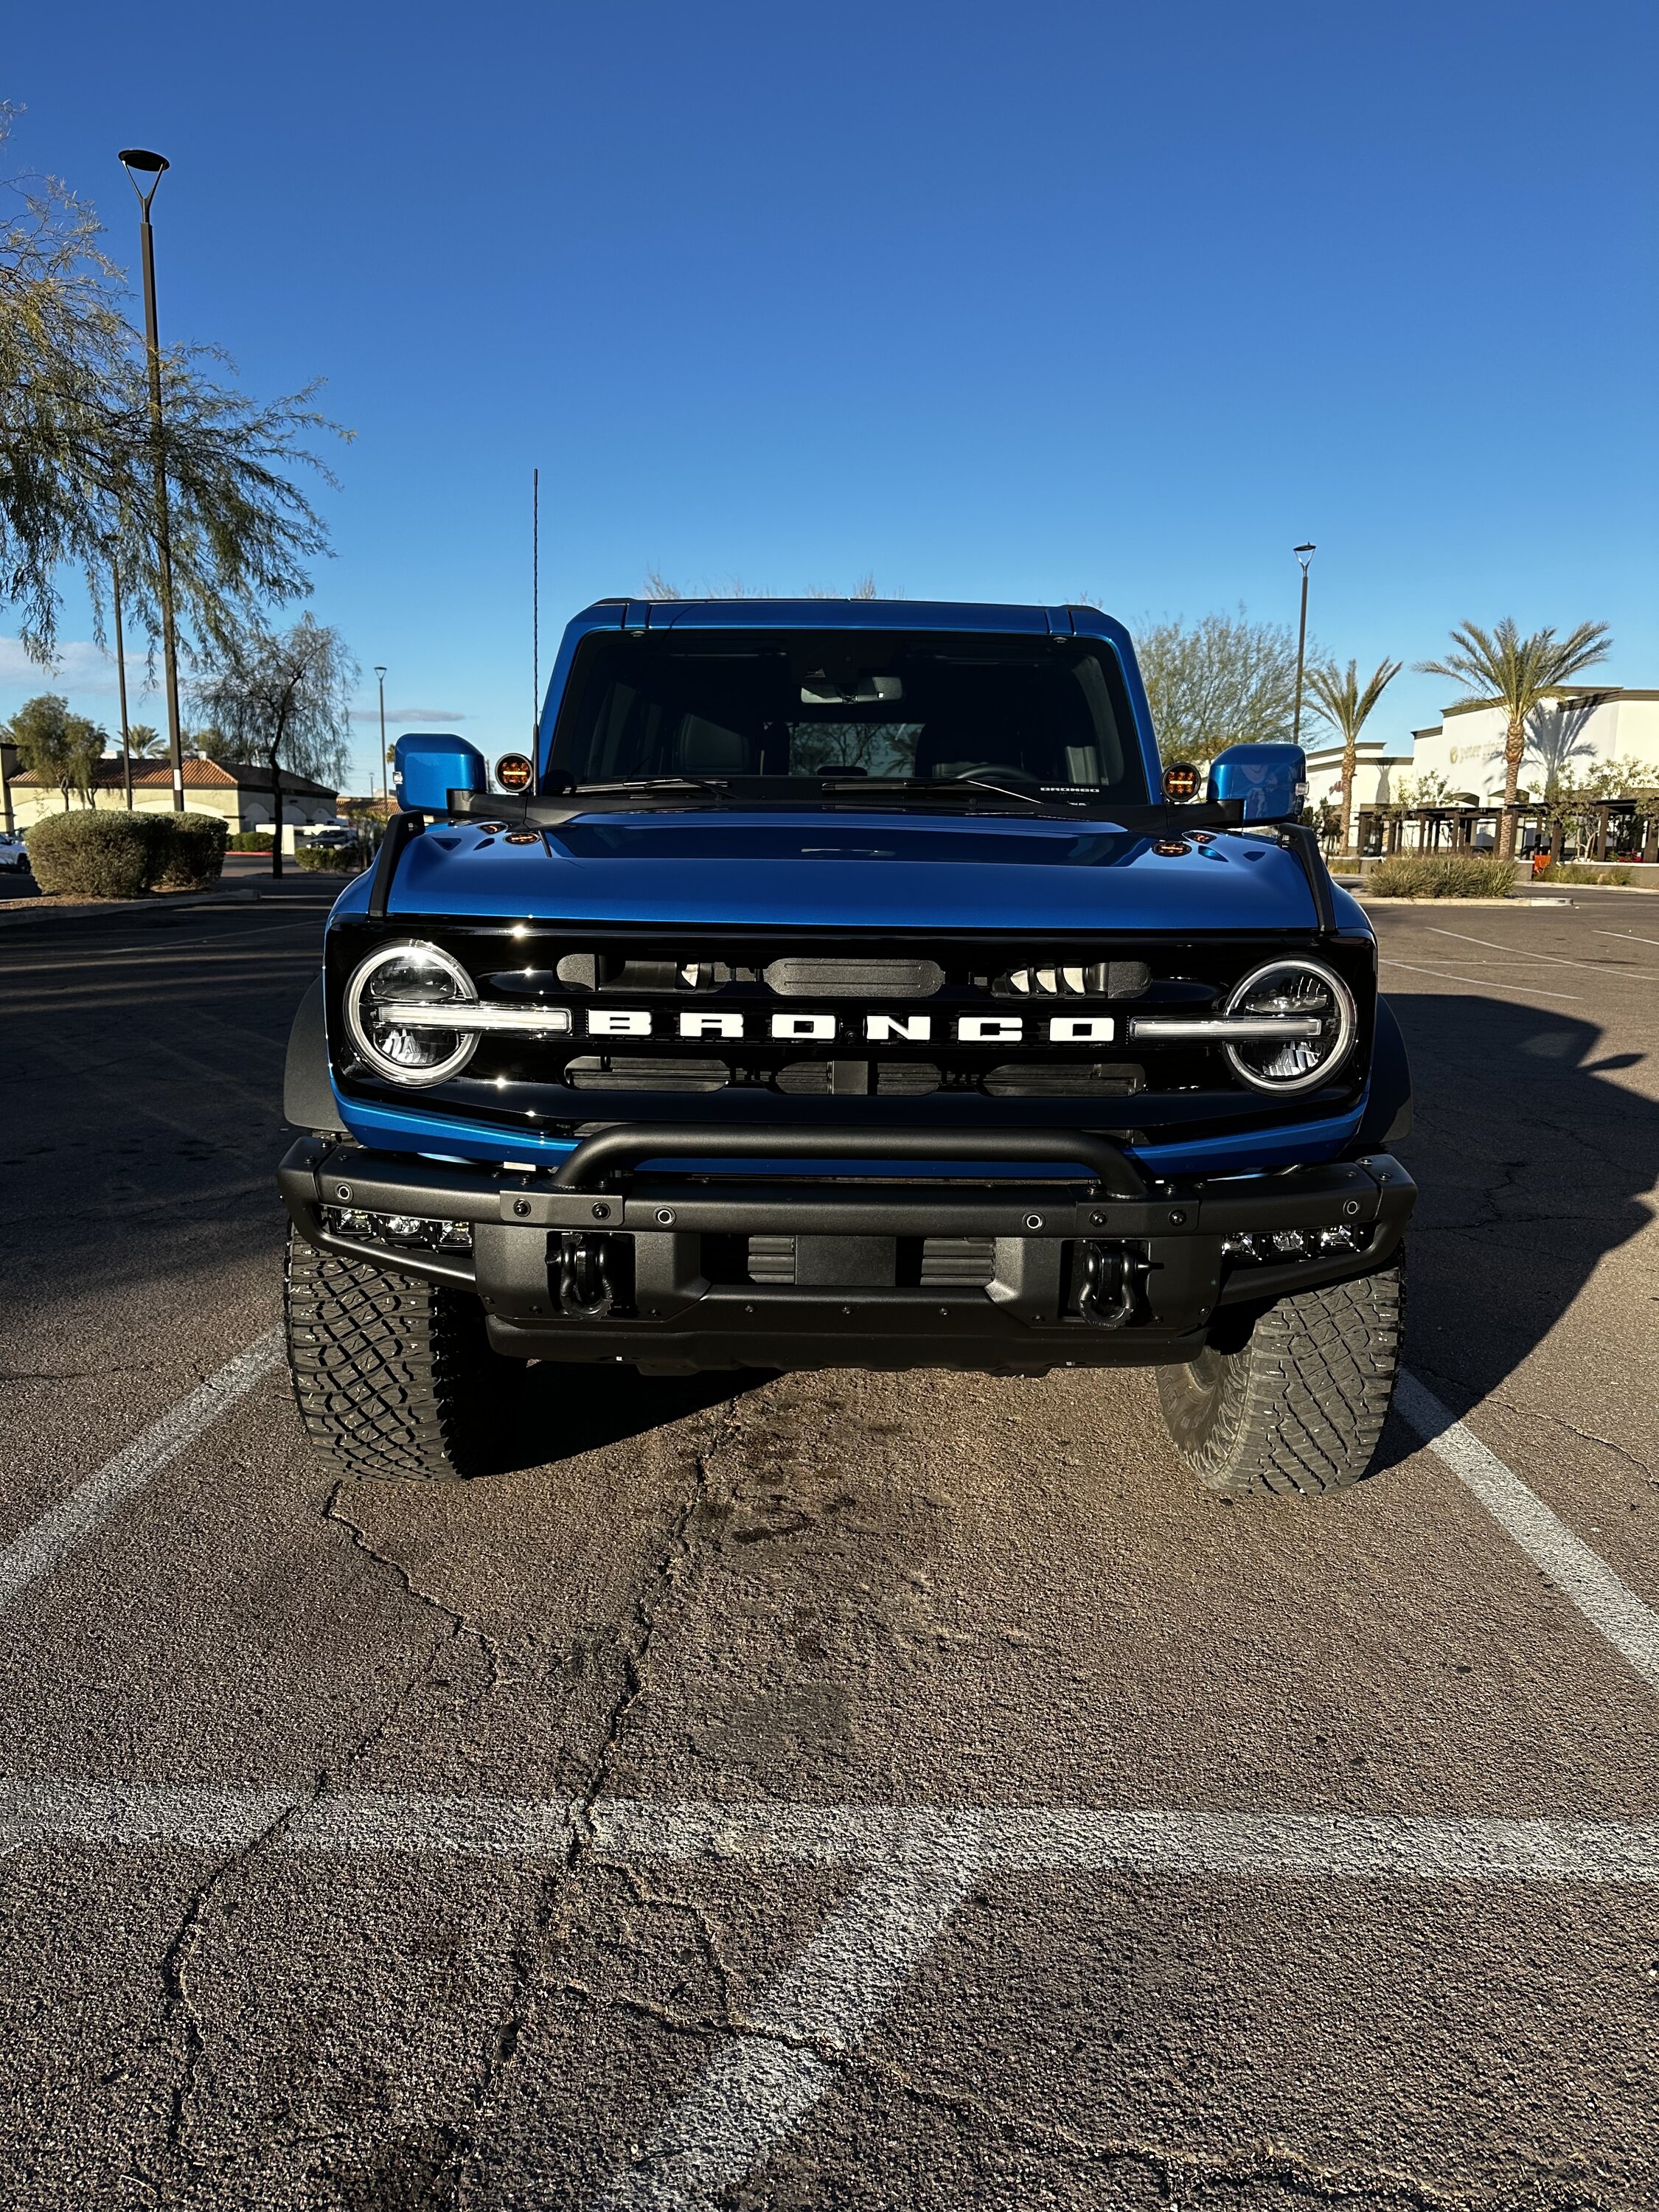 Ford Bronco Mesh grill inserts installed on Big Bend EAC43119-18E6-4581-A0D5-AB42D9D6B4BC